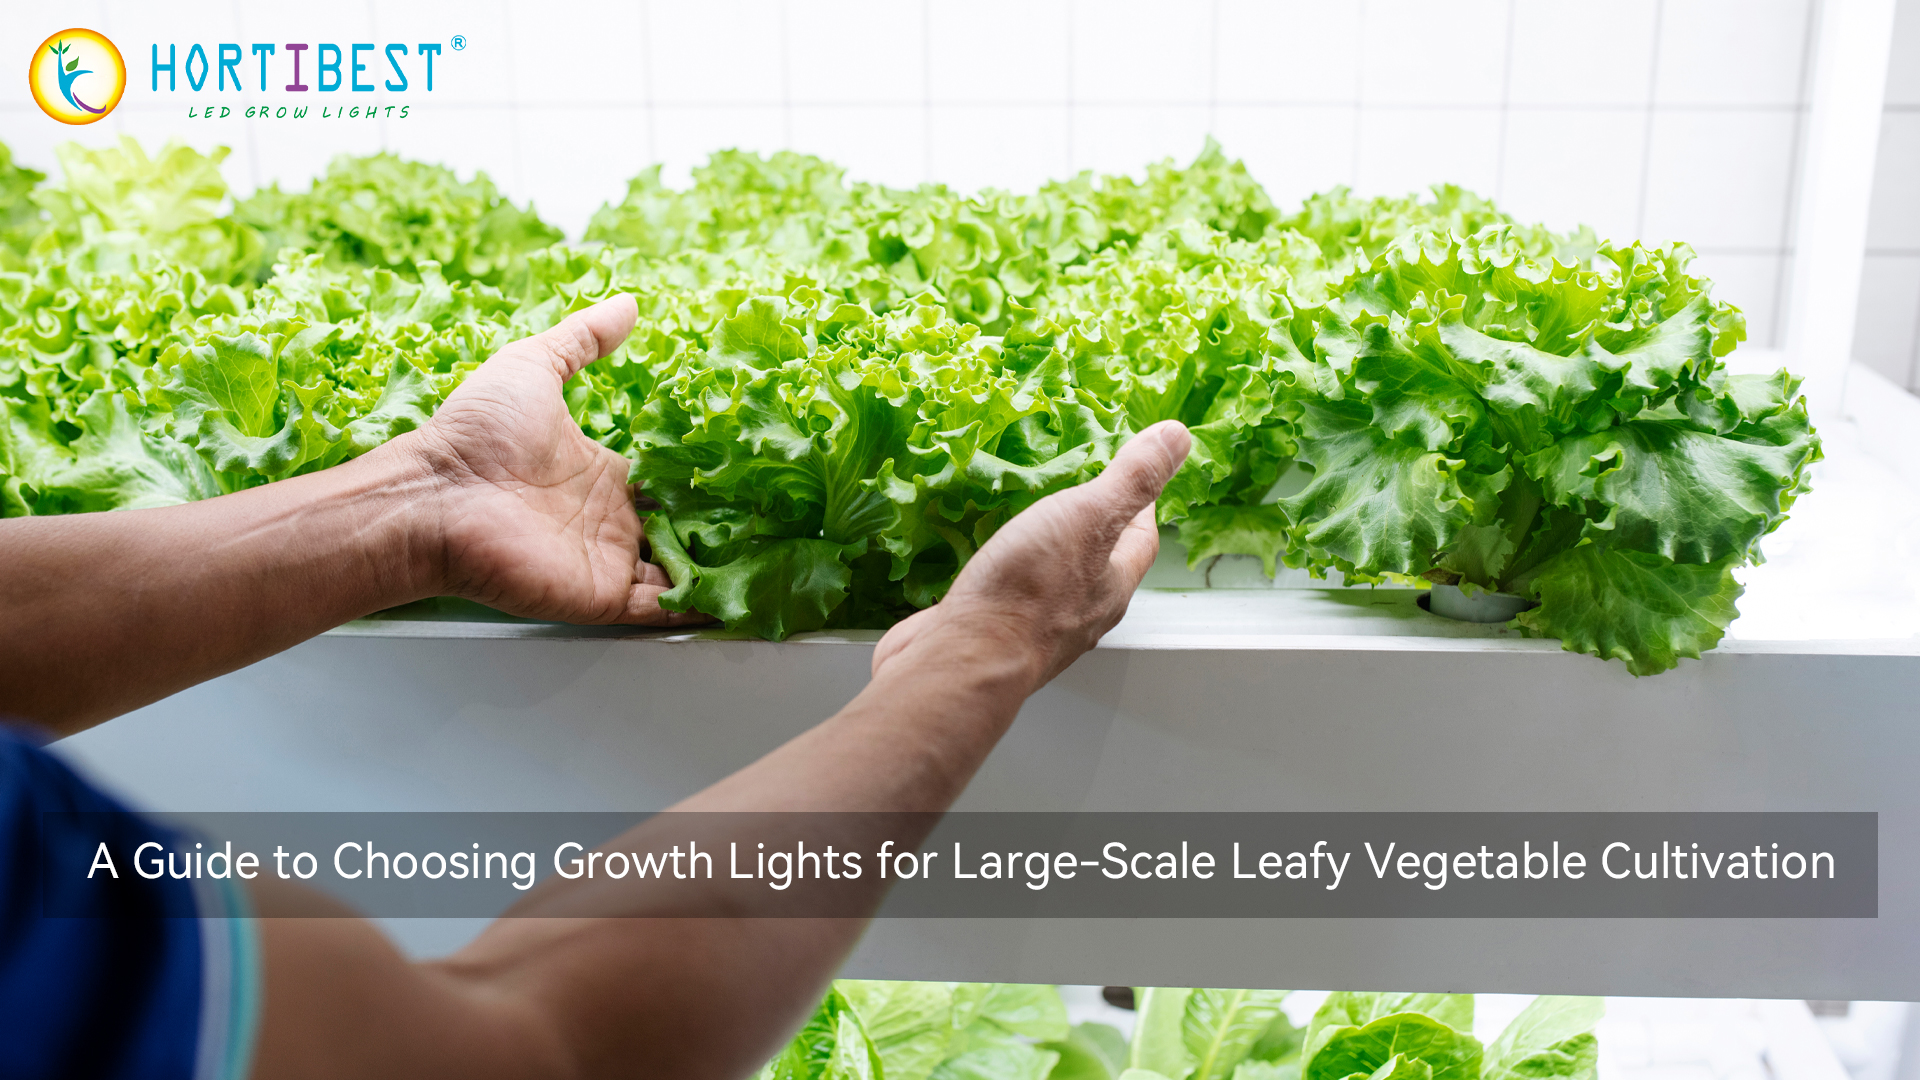 A Guide to Choosing Growth Lights for Large-Scale Leafy Vegetable Cultivation